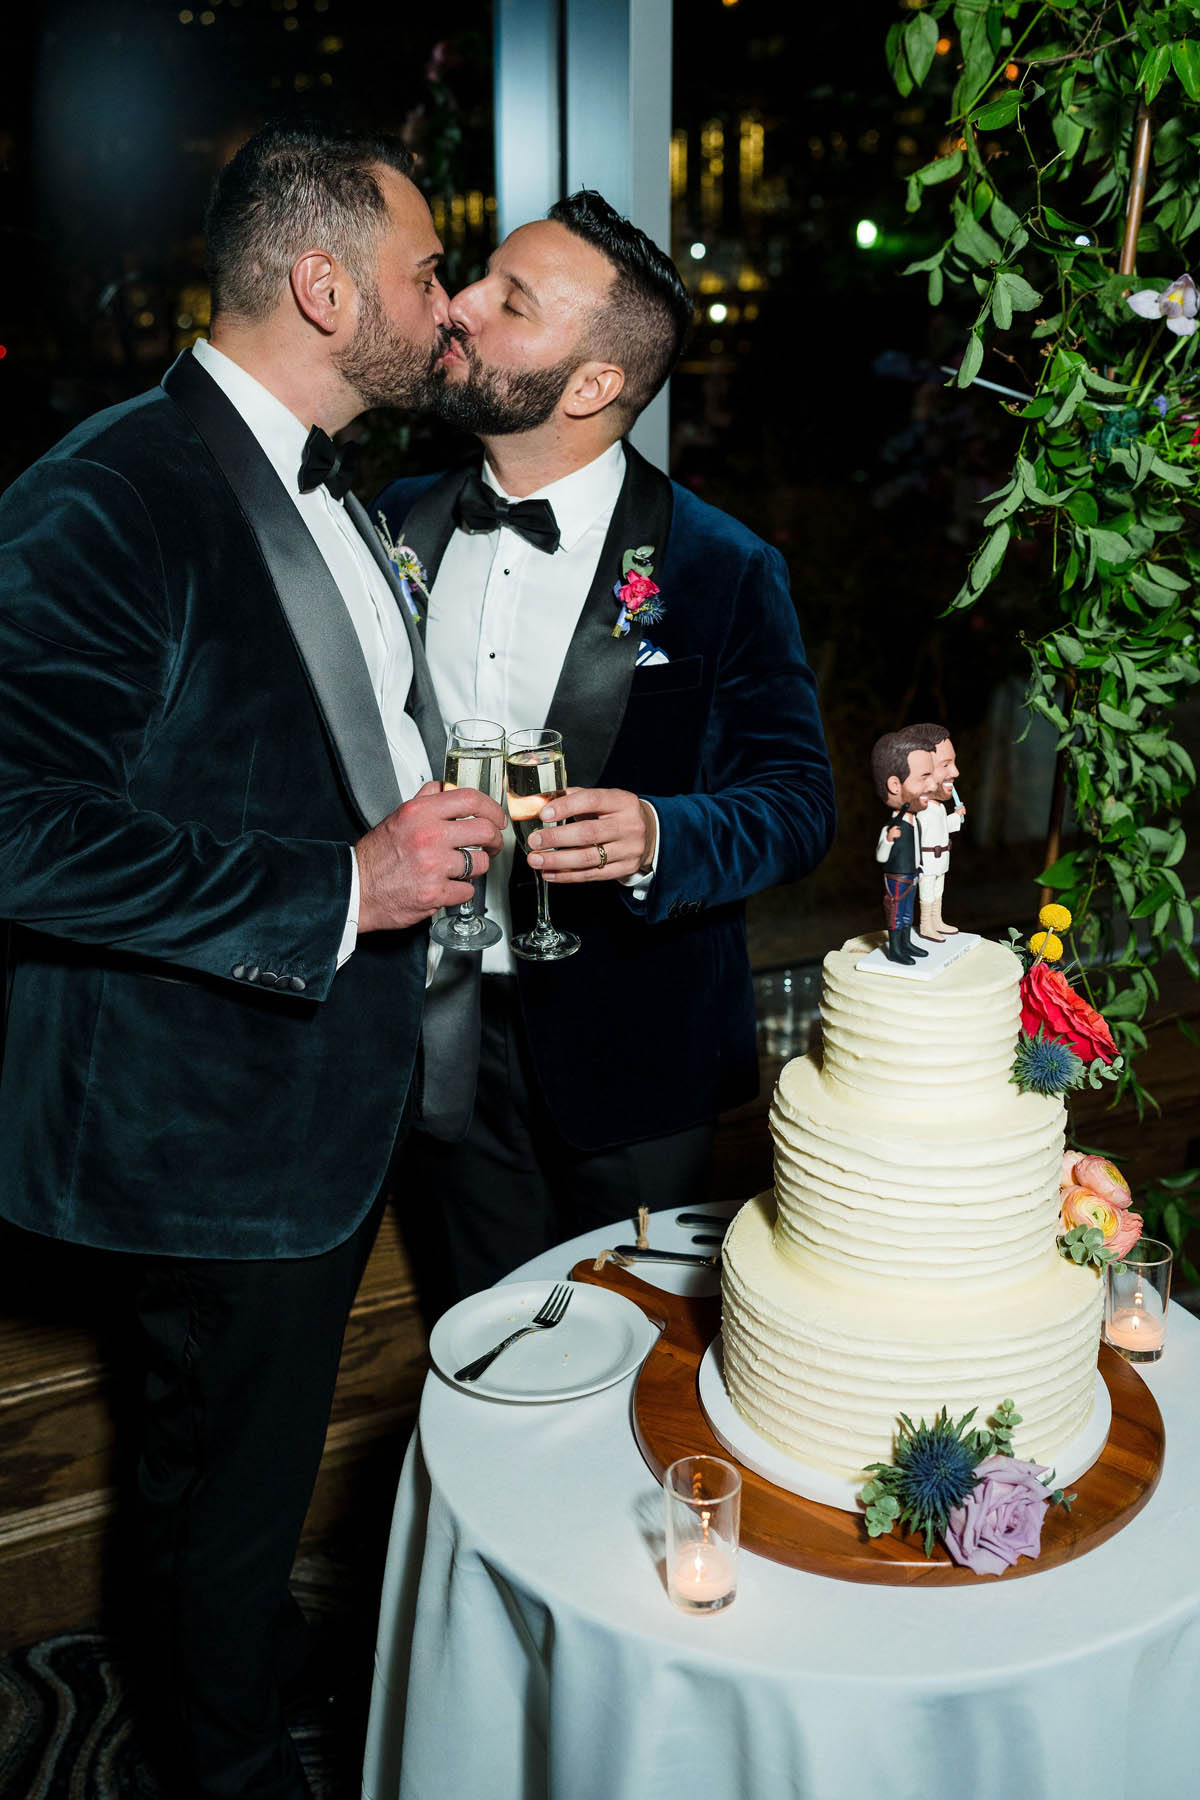 The grooms share a kiss in front of their wedding cake as they clink their champagne glasses.